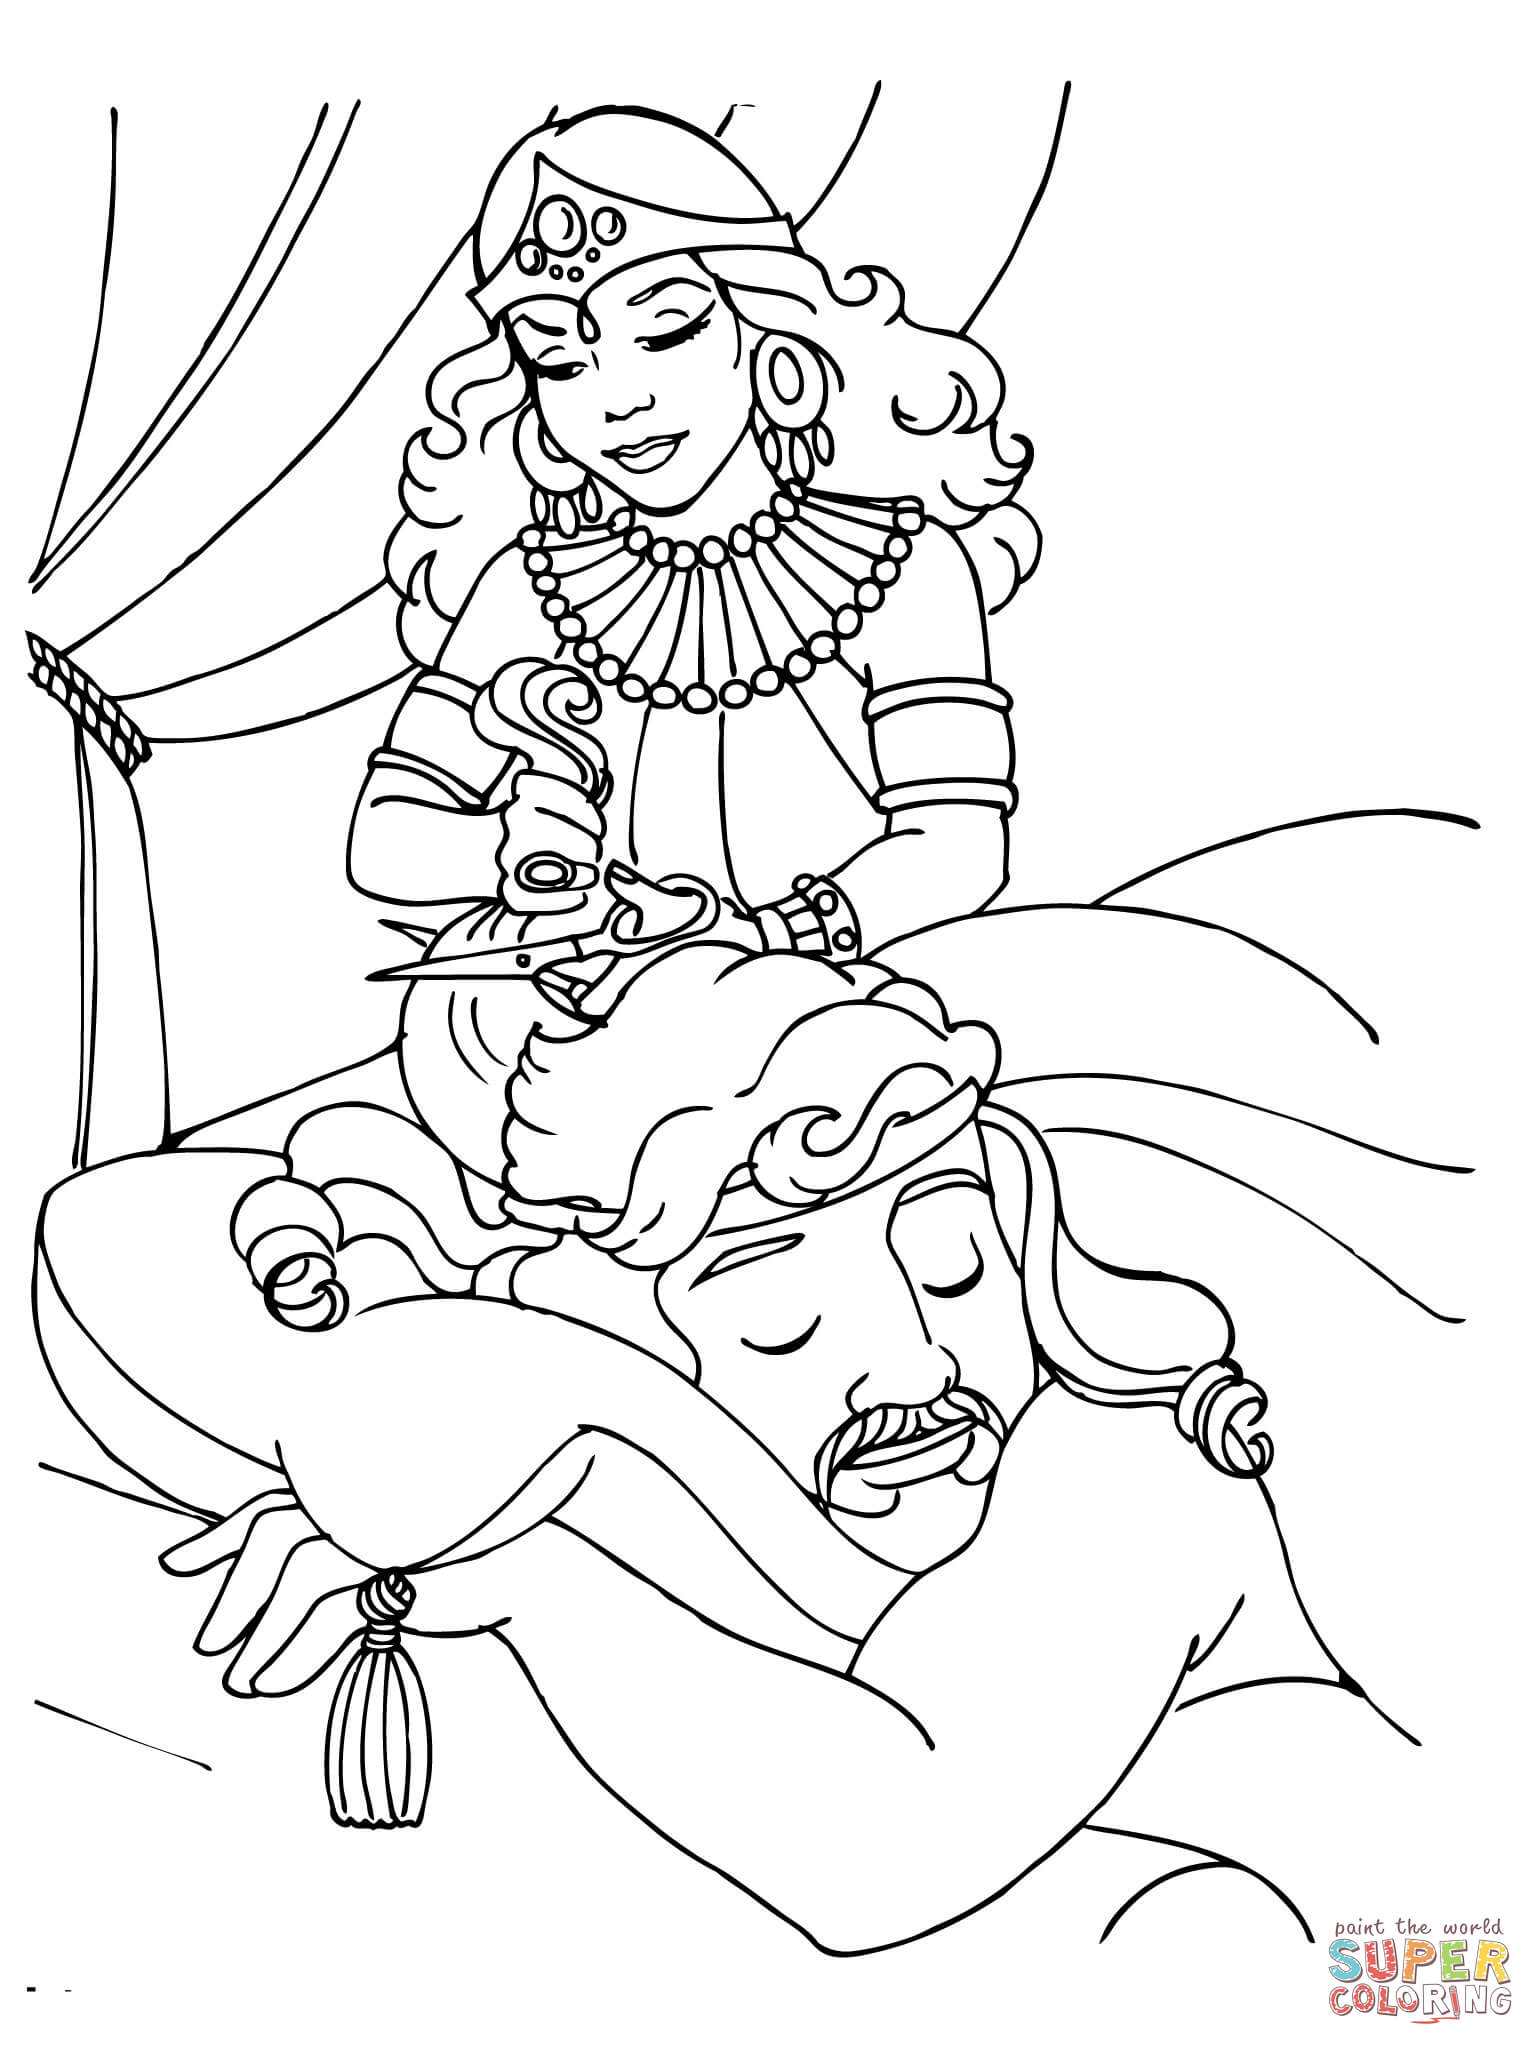 Delilah Cutting Samson's Hair coloring page | Free Printable Coloring Pages